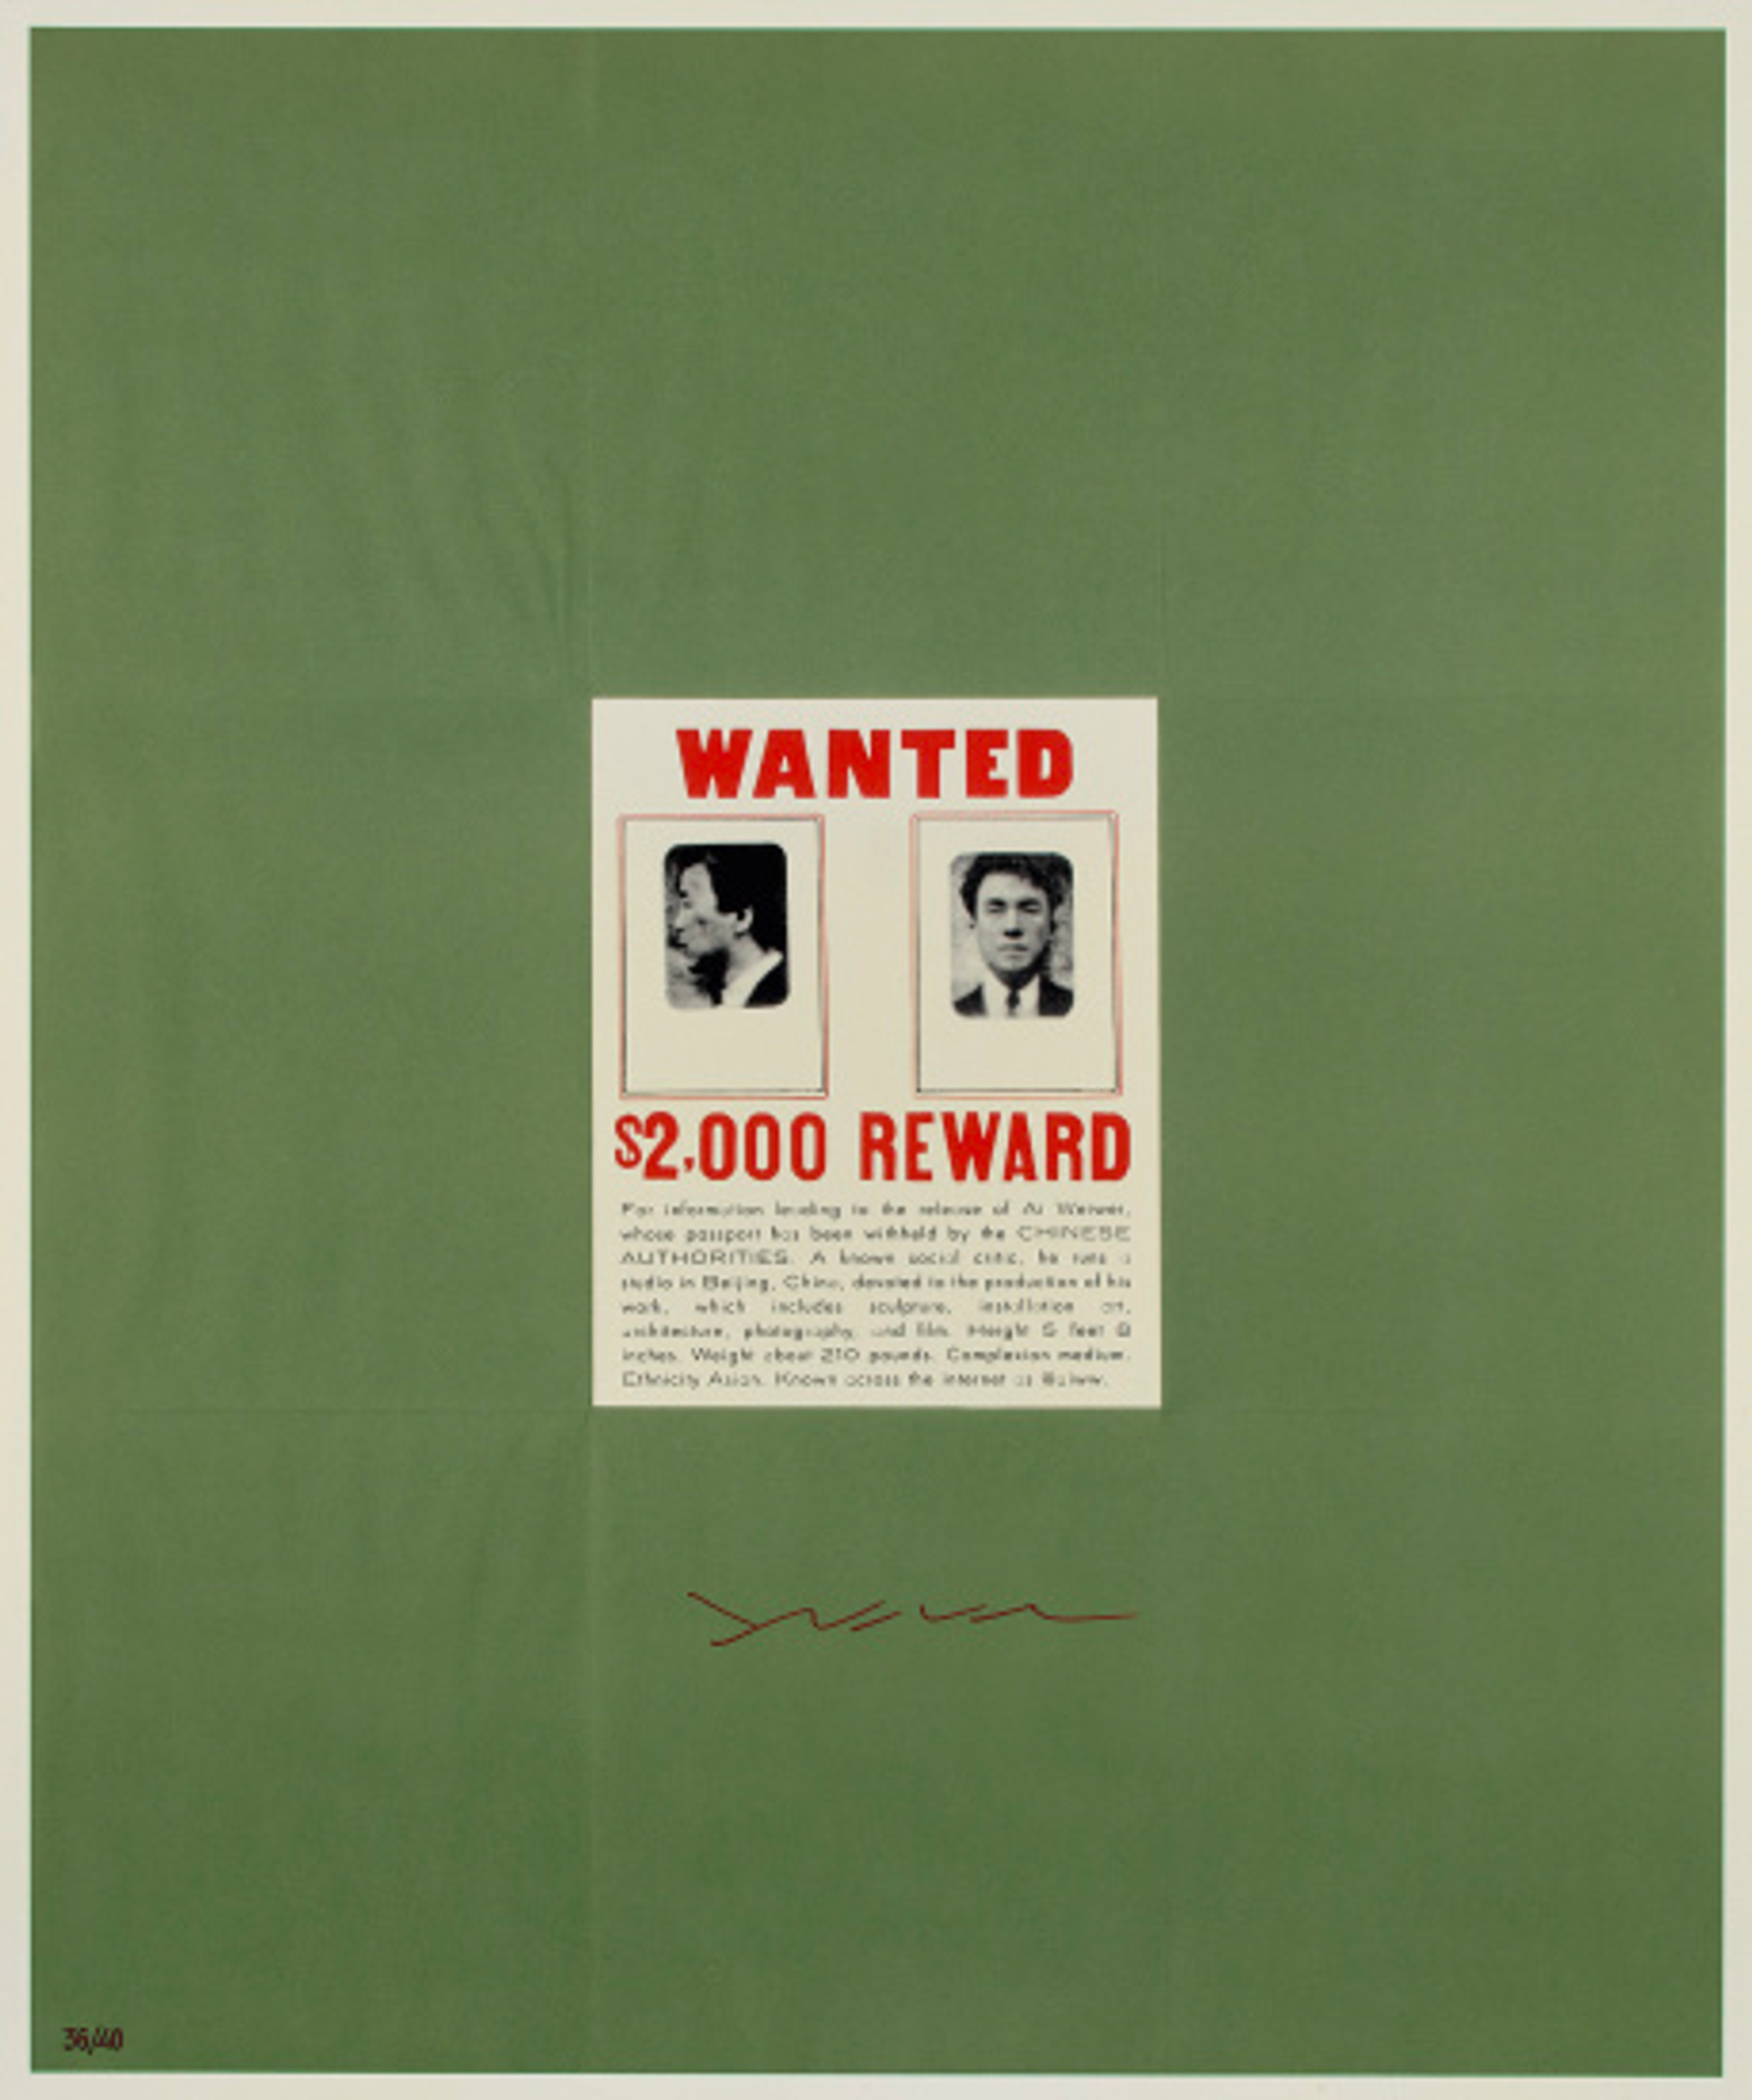 A cream 'Wanted' sign on a green background with two small images of a male side profile and male front profile and '$2,000 reward' in red and writing written beneath the images